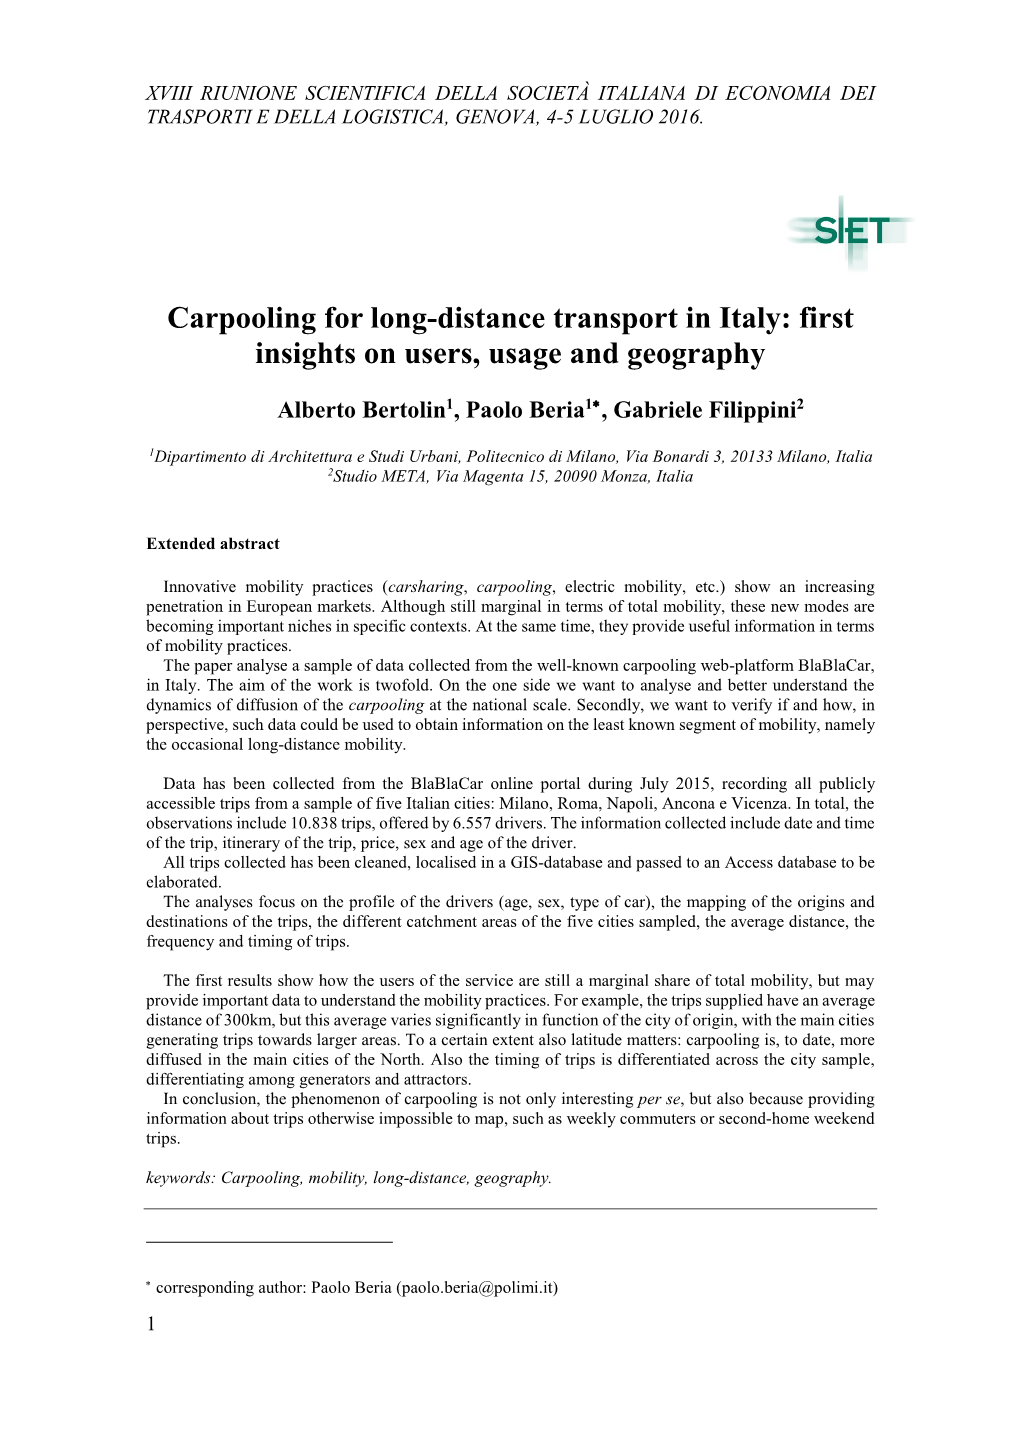 Carpooling for Long-Distance Transport in Italy: First Insights on Users, Usage and Geography